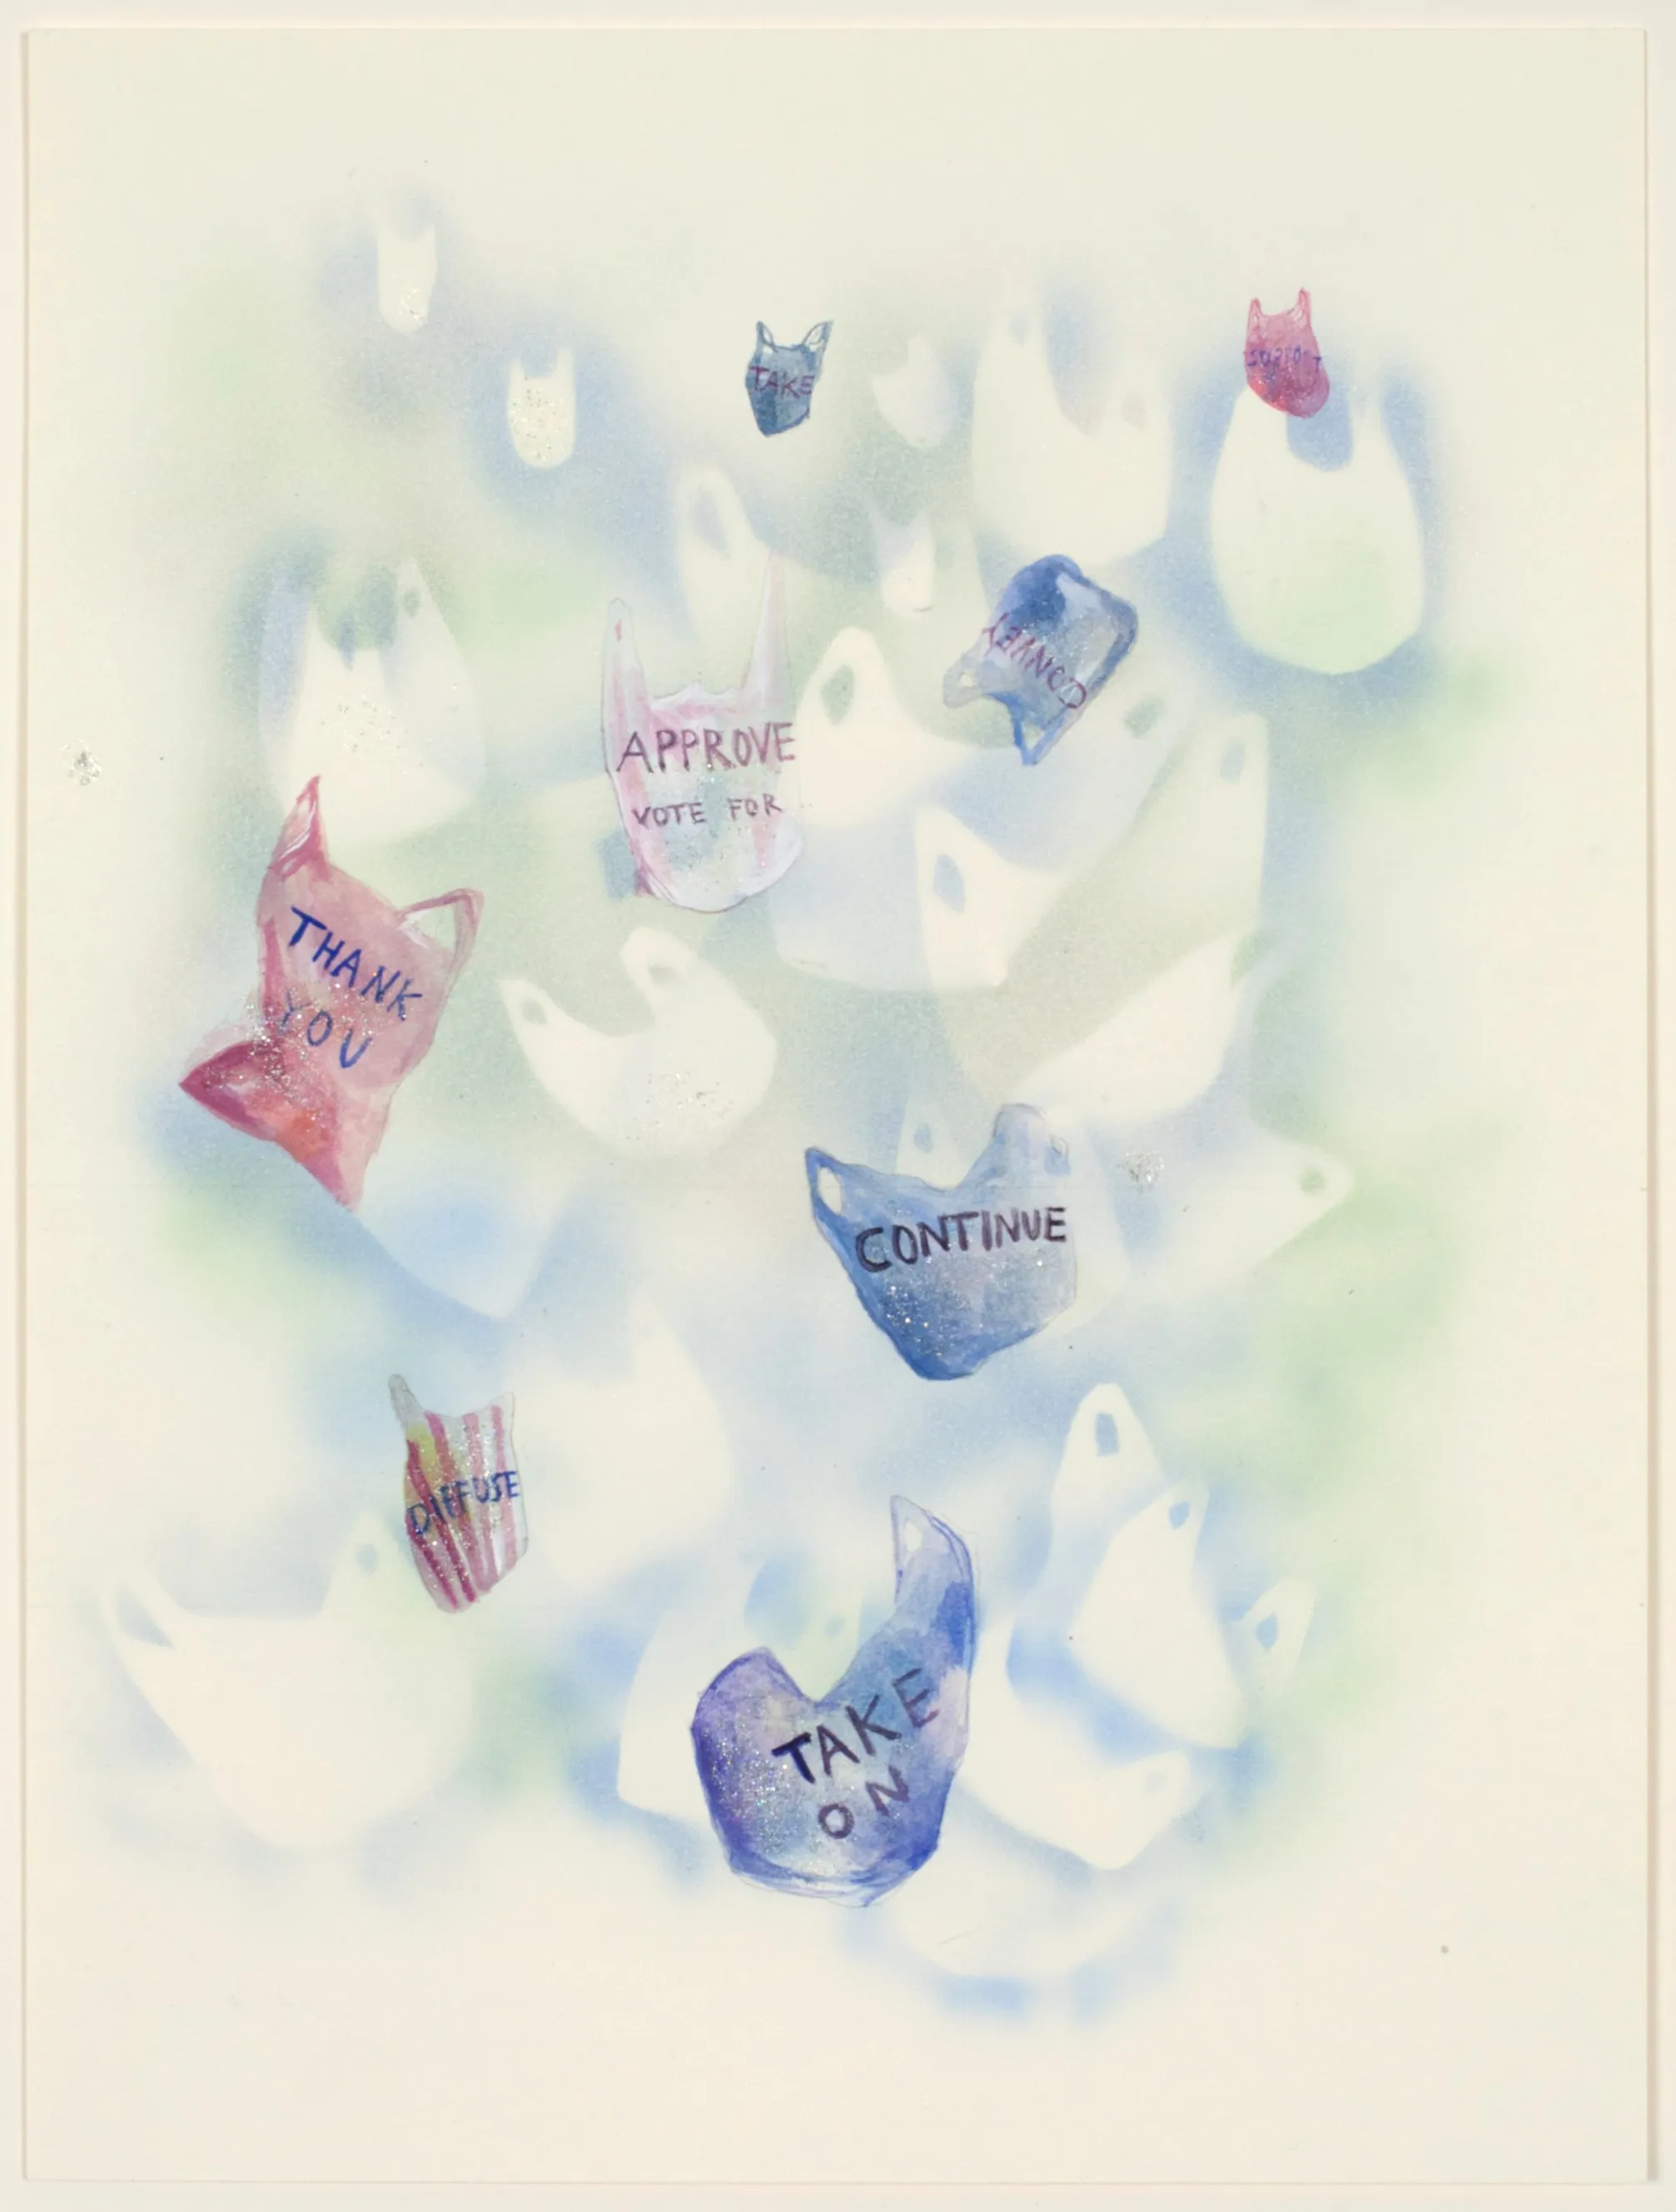 A drawing of red and blue plastic shopping bags falling down, with words like 'Continue' and 'Thank you' written on them.